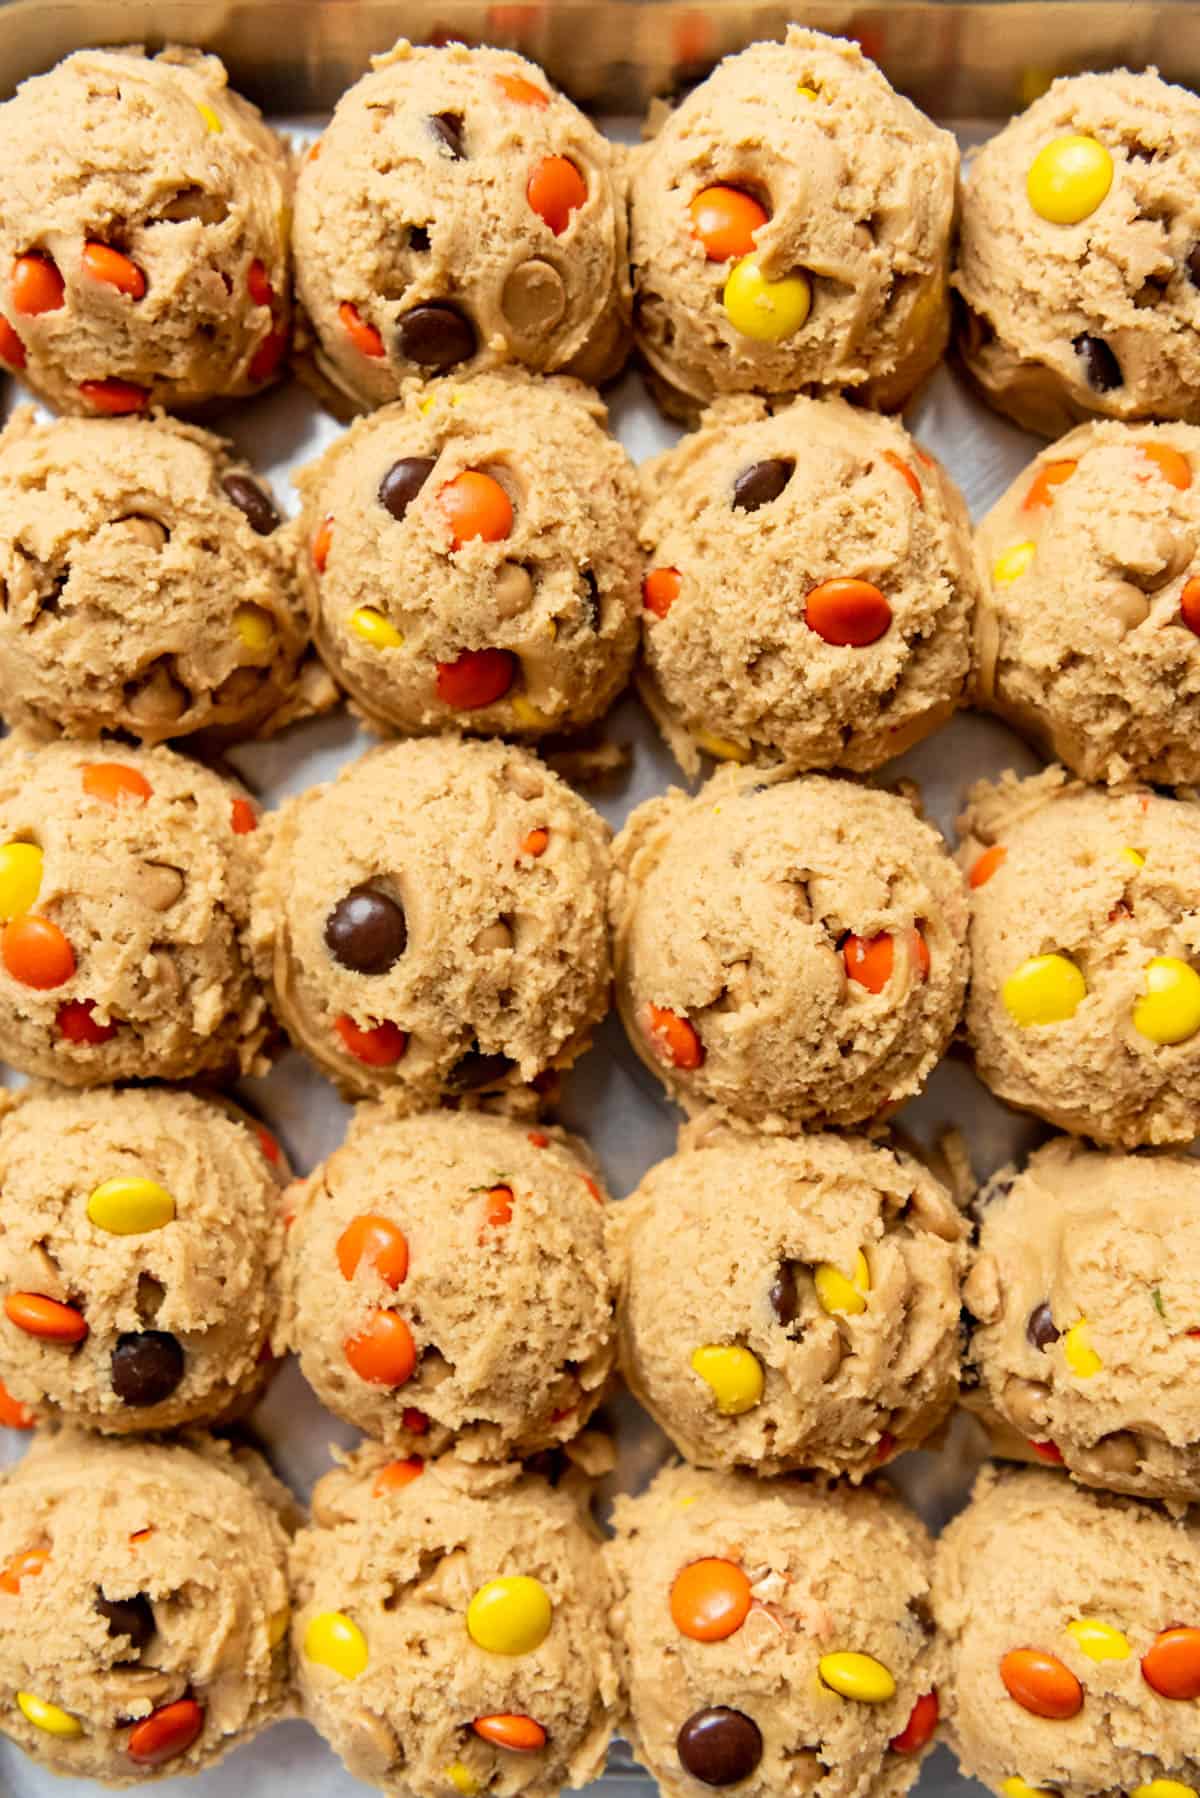 An overhead image of Reese's Pieces peanut butter cookie dough.